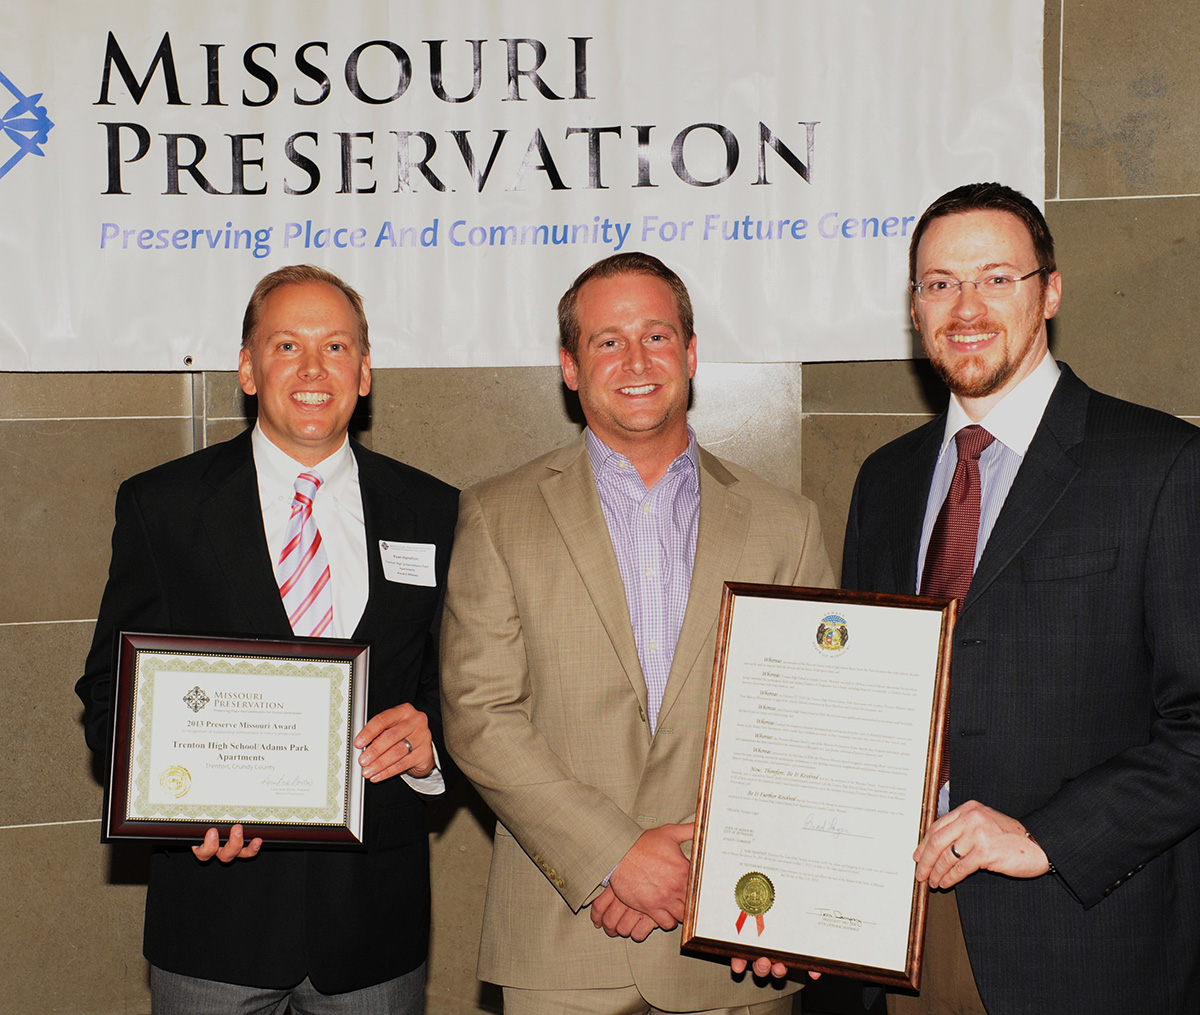 Ryan Hamilton, Vice President and Douglas Hamilton, construction supervisor, along with Mr. Rich Germinder fo the office of Missouri State Senator Brad Lager; display both the 2013 Preserve Missouri Award honoring Hamilton Properties Corporation for their successful conversion and preservation in the Adams Park School project, and a resolution from the Missouri State Senate honoring the Adams Park School project and receipt of the Preserve Missouri Award.